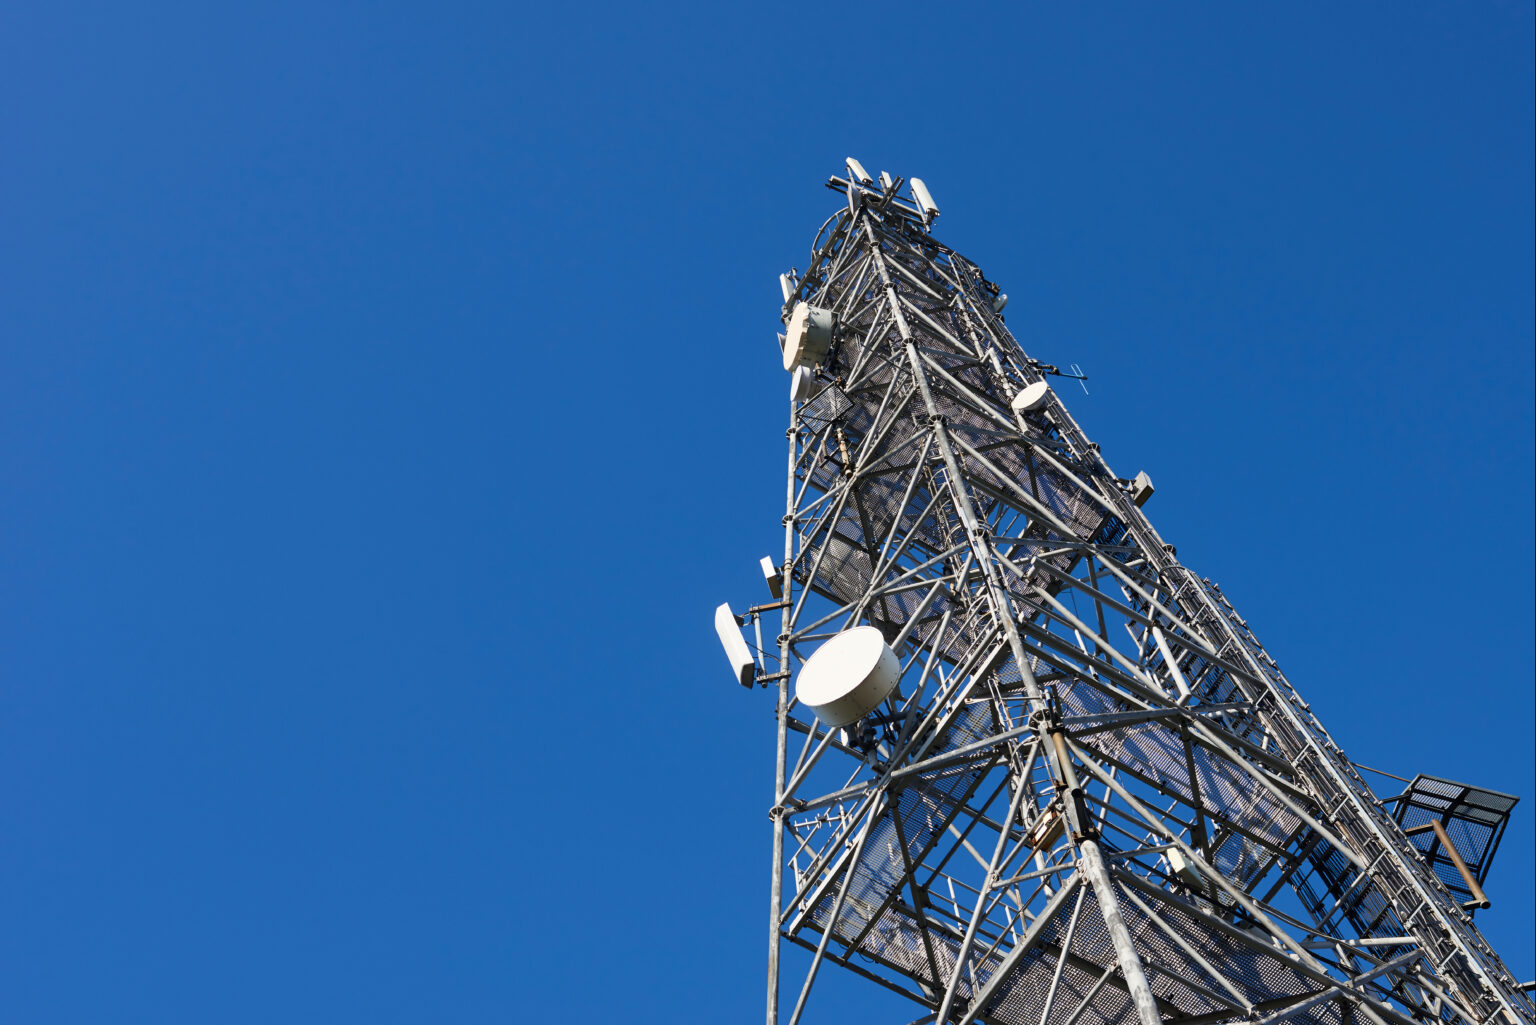 Telecommunication tower with clear blue sky background. Antenna on blue sky. Radio and satellite pole. Communication technology. Telecommunication industry. Mobile or telecom 4g and 5g network.